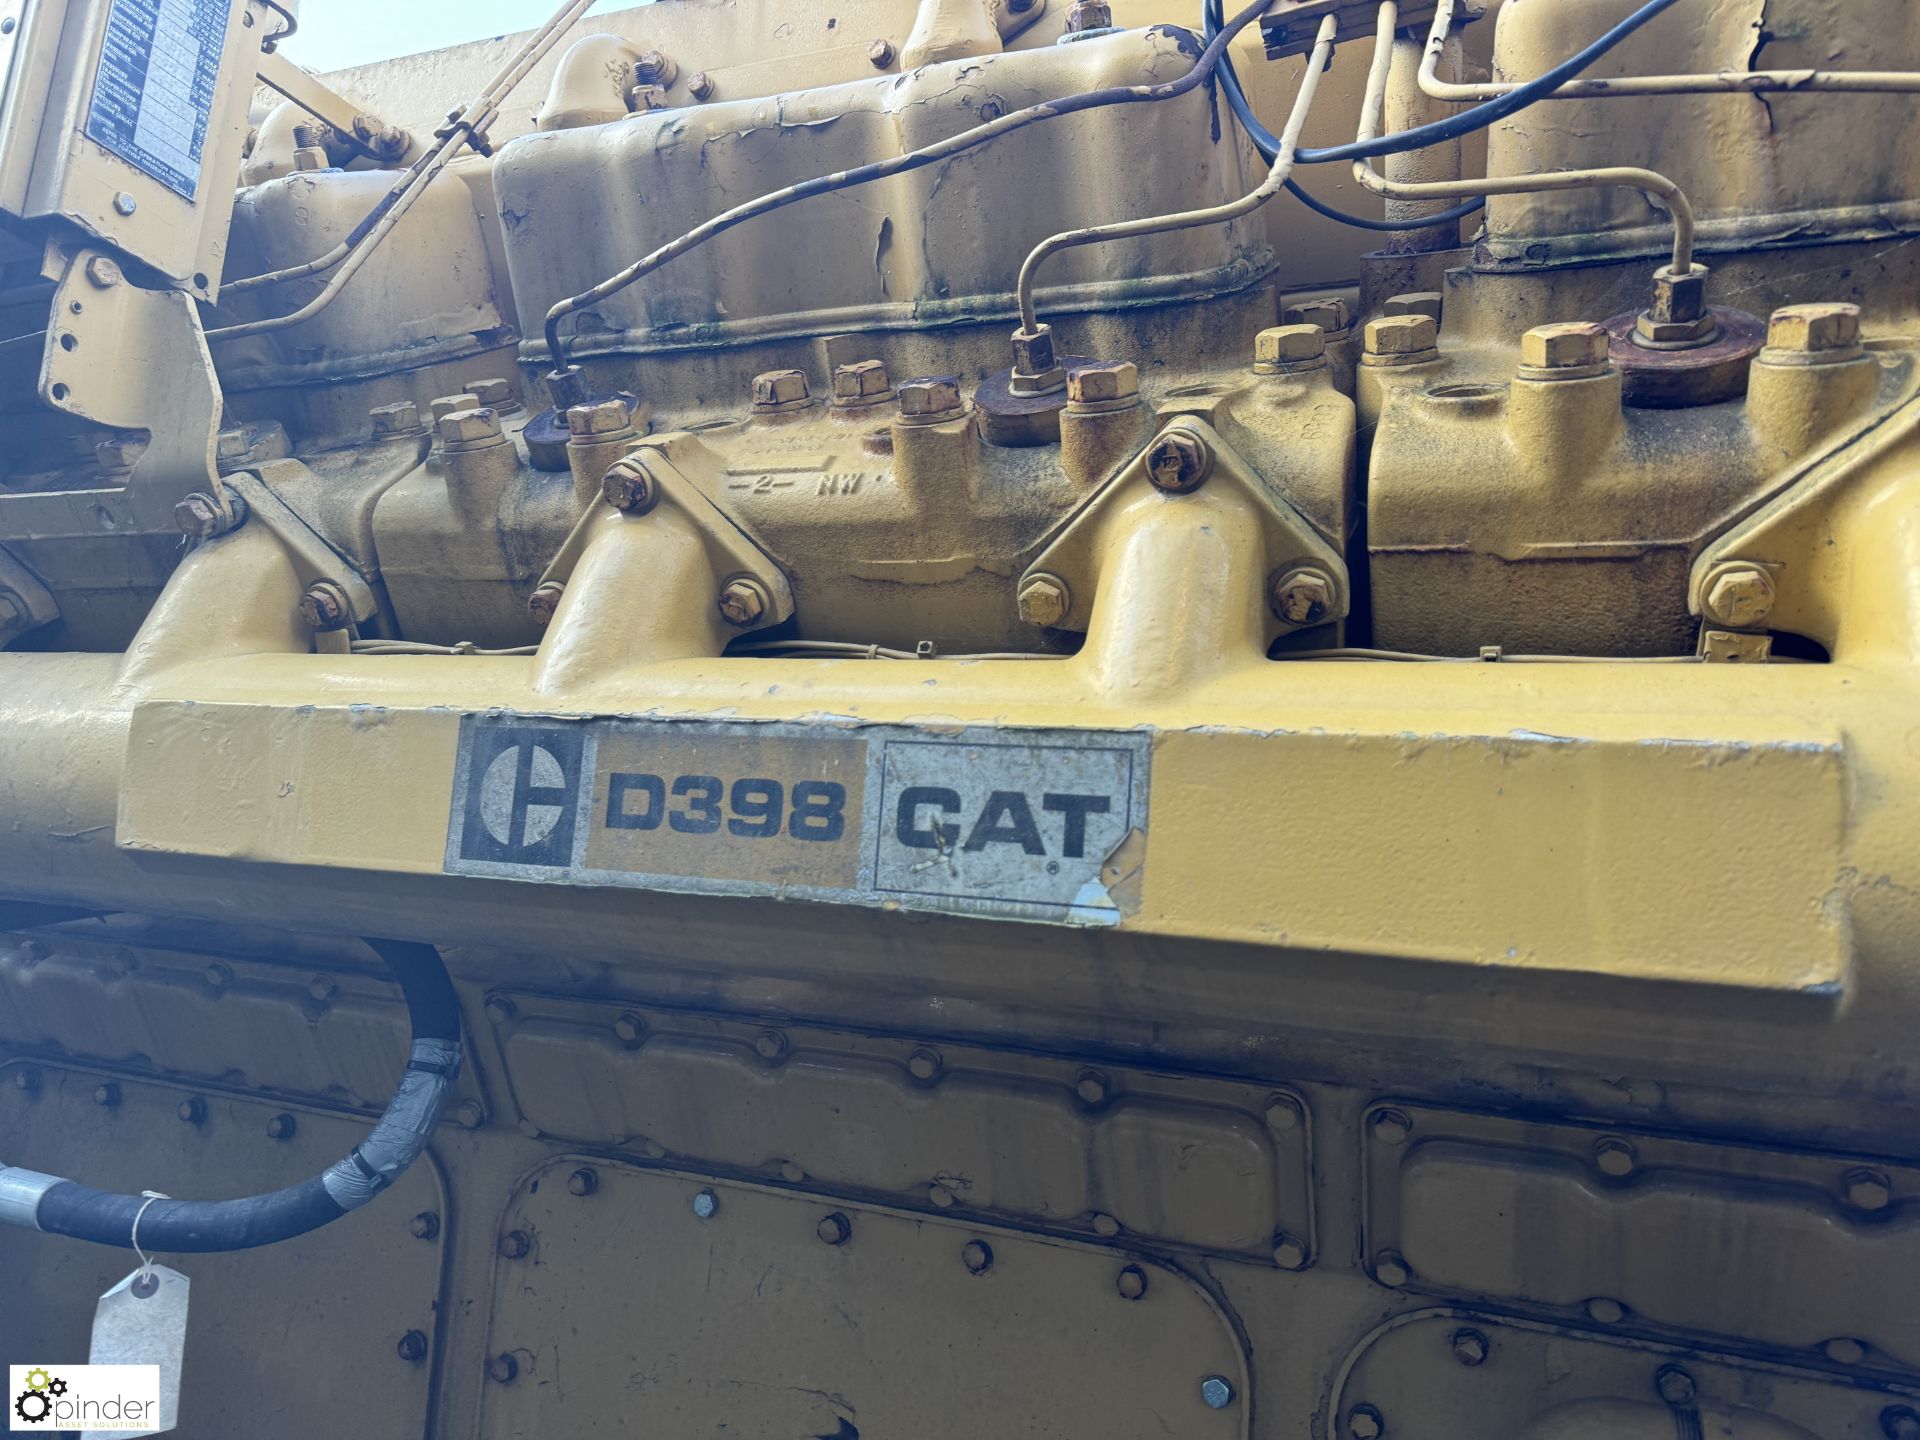 Caterpillar skid mounted Generator, 1,000kva with CAT D398 engine, 800HP 12-cylinder, engine - Image 22 of 28